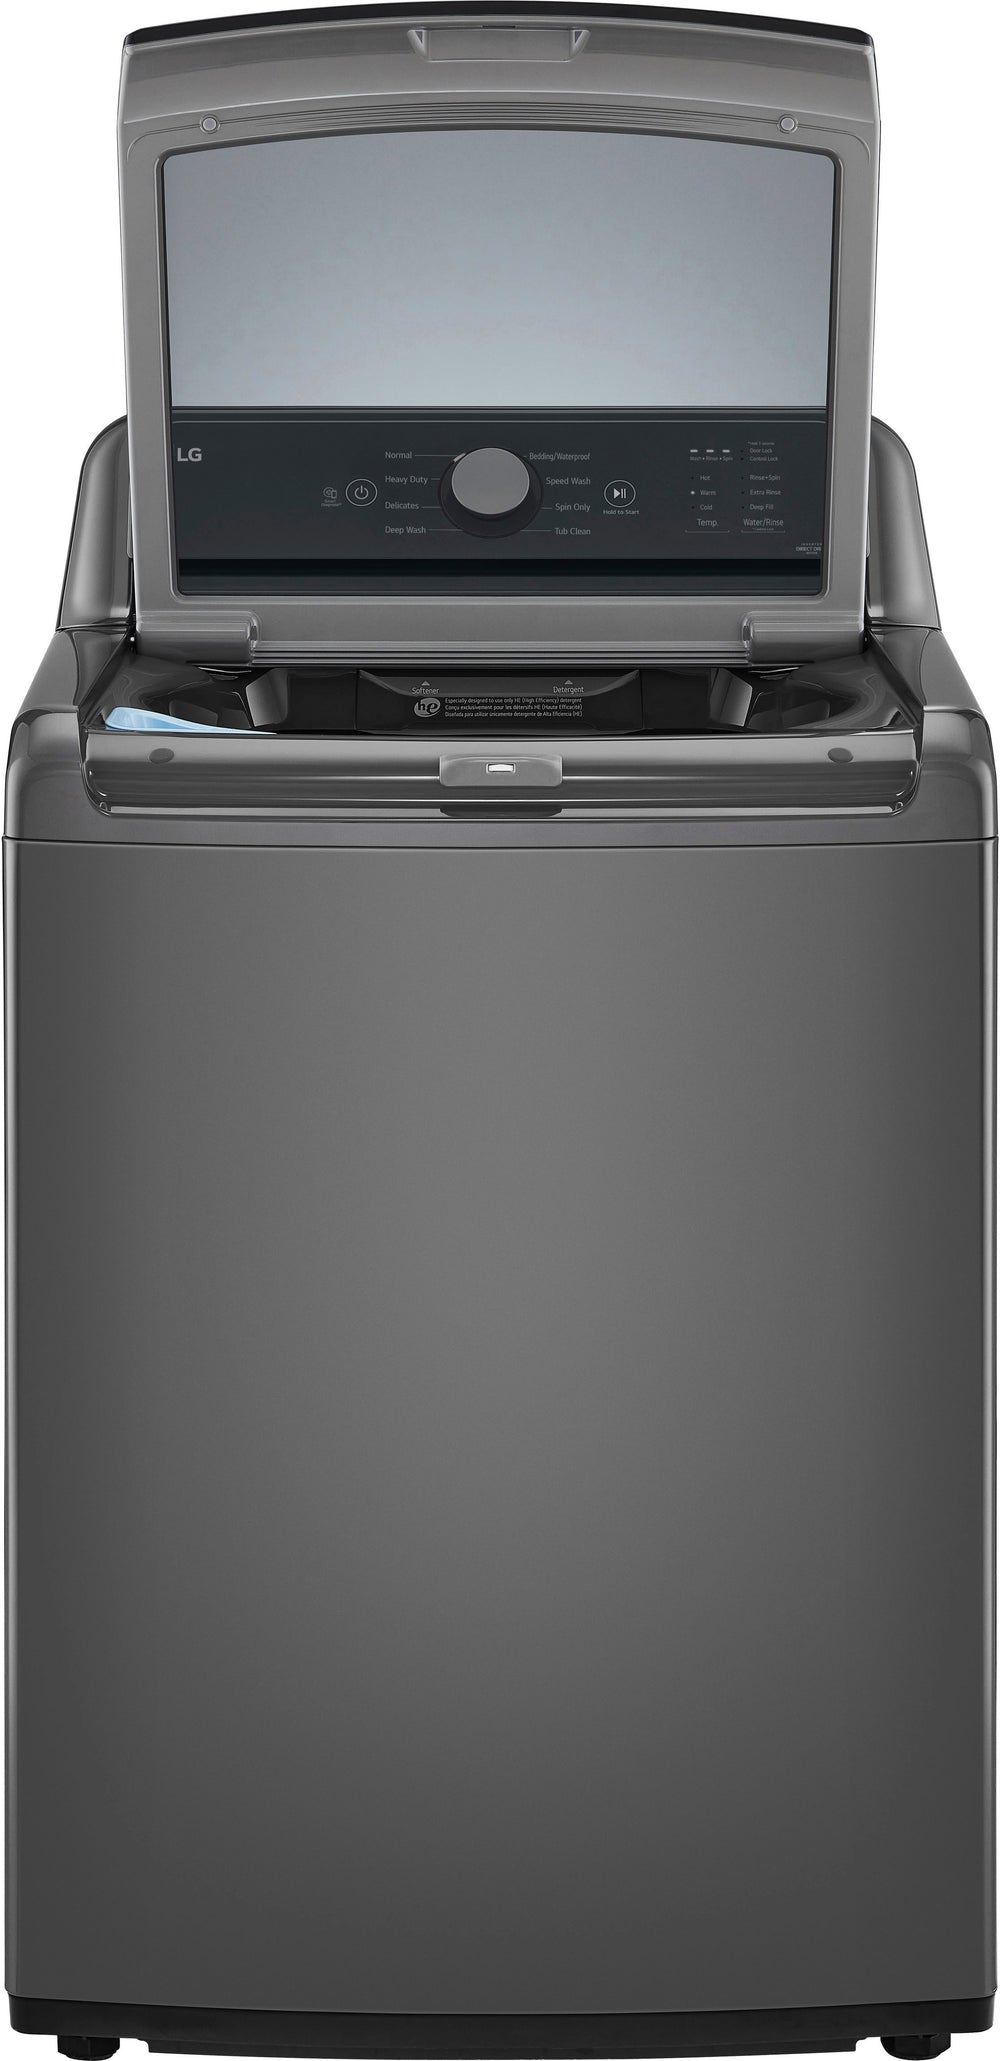 LG - 4.1 Cu. Ft. High-Efficiency Top Load Washer with TurboDrum Technology - Monochrome Grey_1